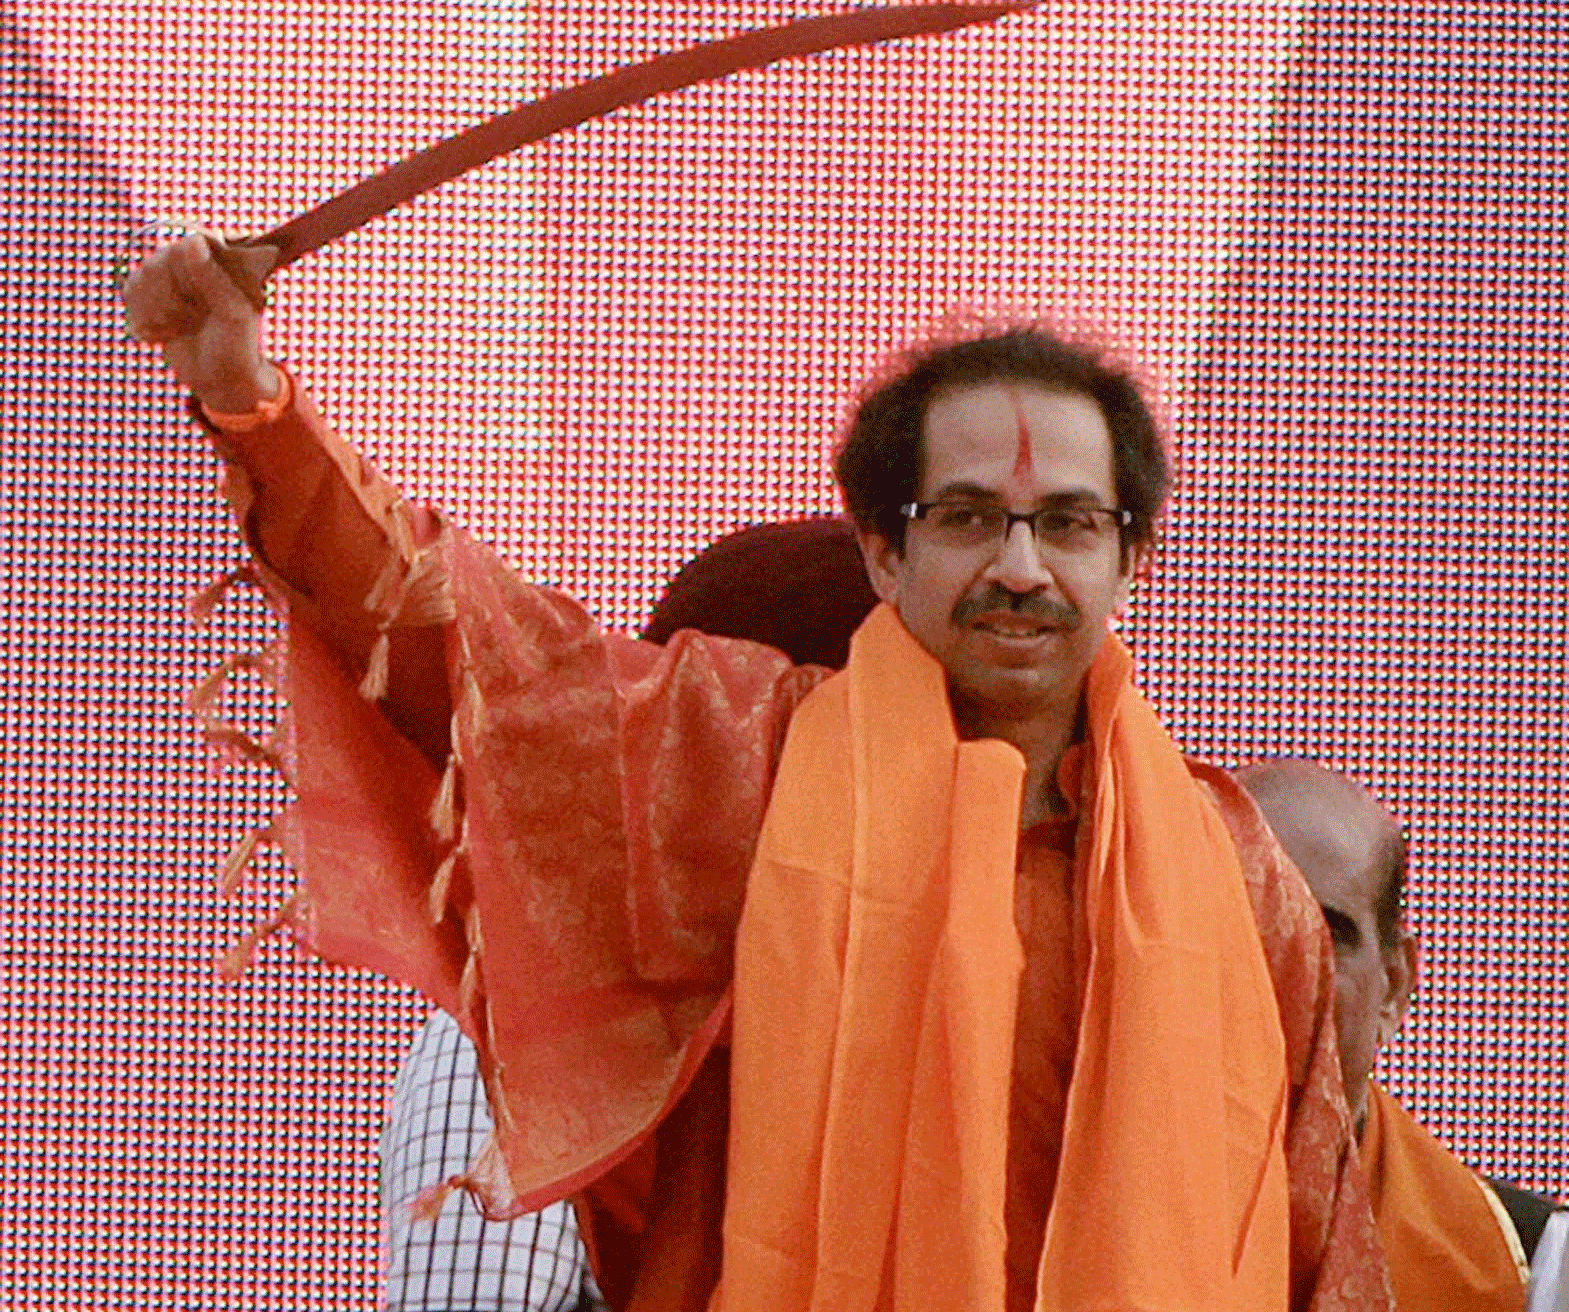 The Shiv Sena chief threw a jab at the BJP's hesitance to back Mohan Bhagwat's Presidential candidature. Photo credit: PTI.